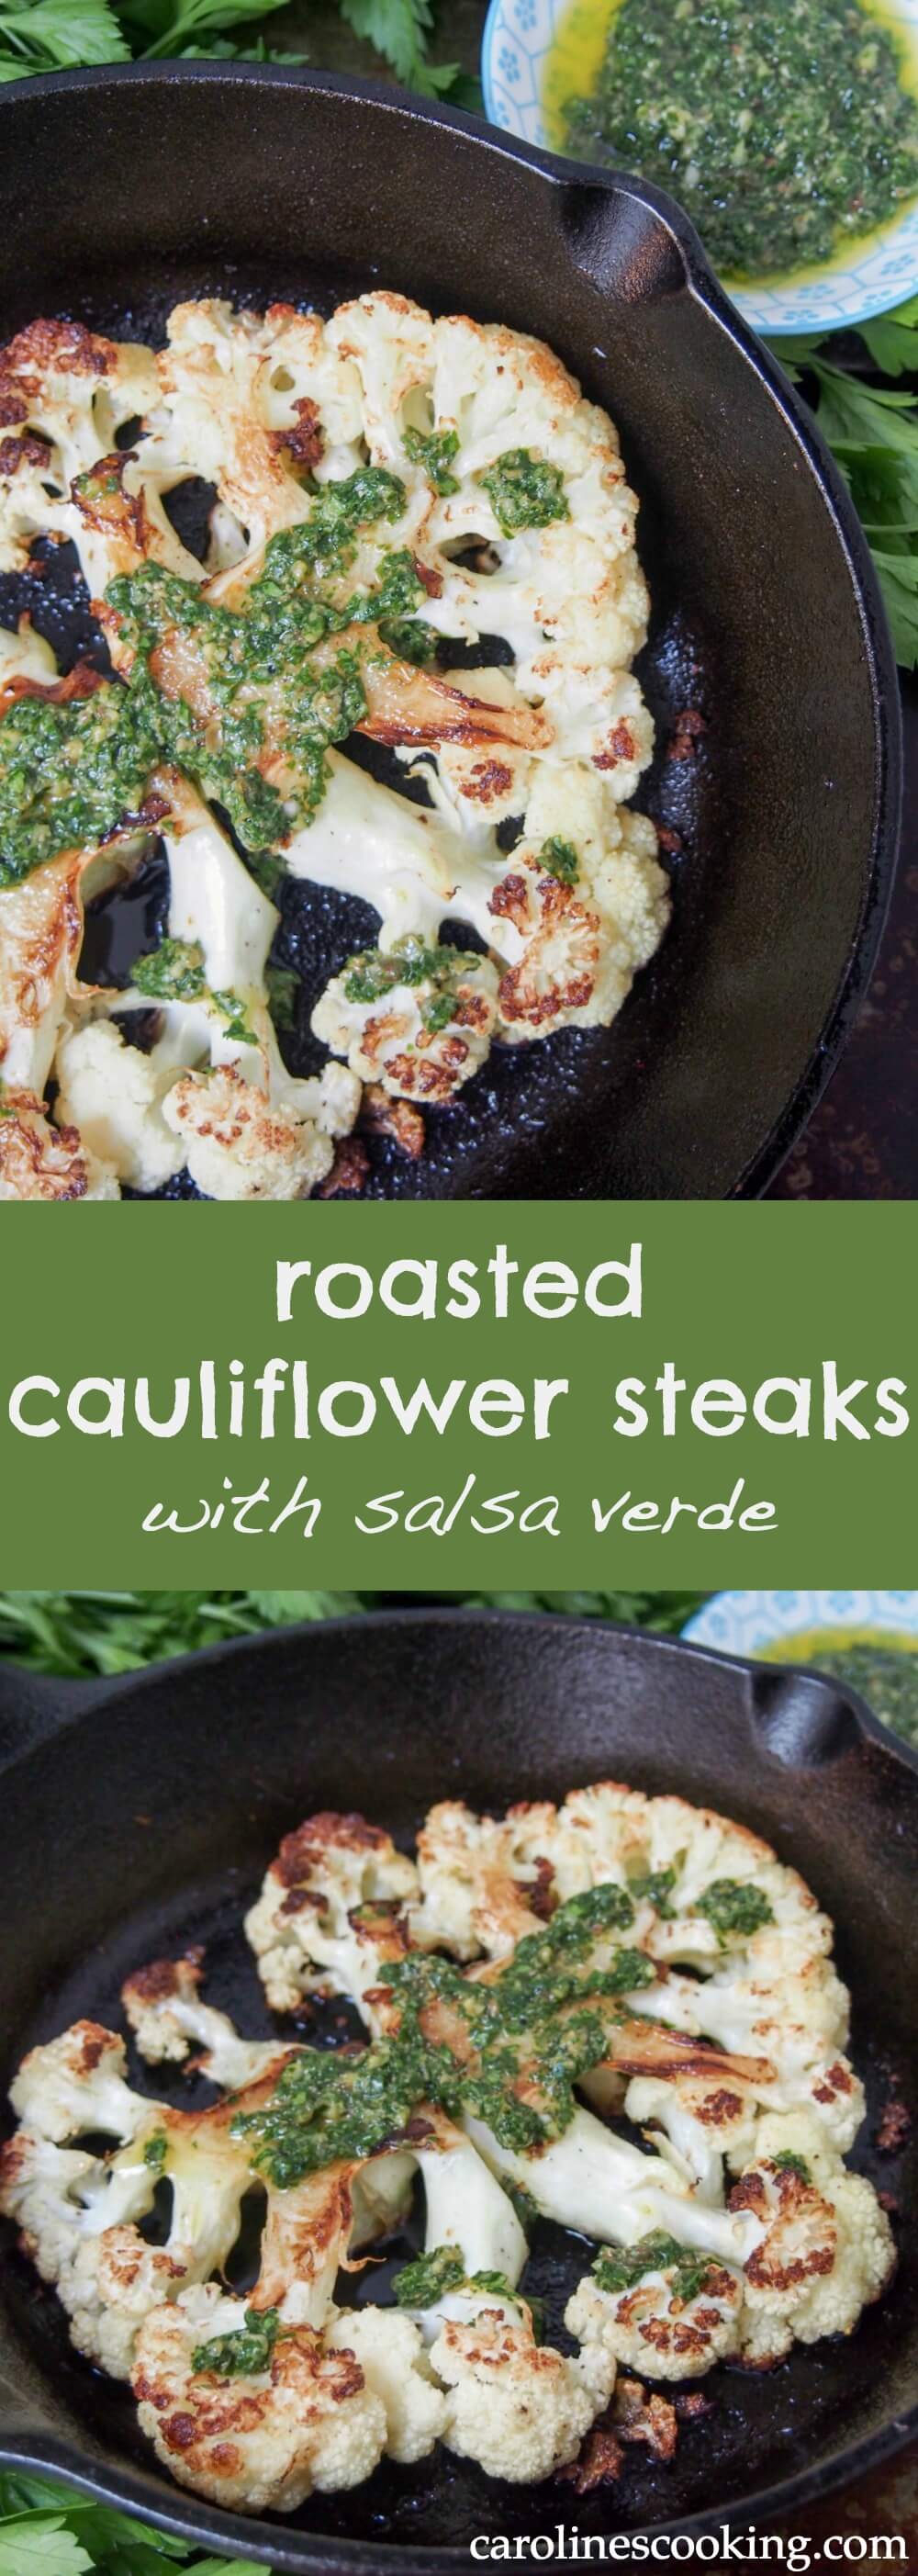 These cauliflower steaks become meltingly tender and the flavors in salsa verde go so well to make either a tasty side or a main in itself.  Low carb (and easily adapted to vegetarian and vegan too) #cauliflower #cauliflowersteak #vegetarian